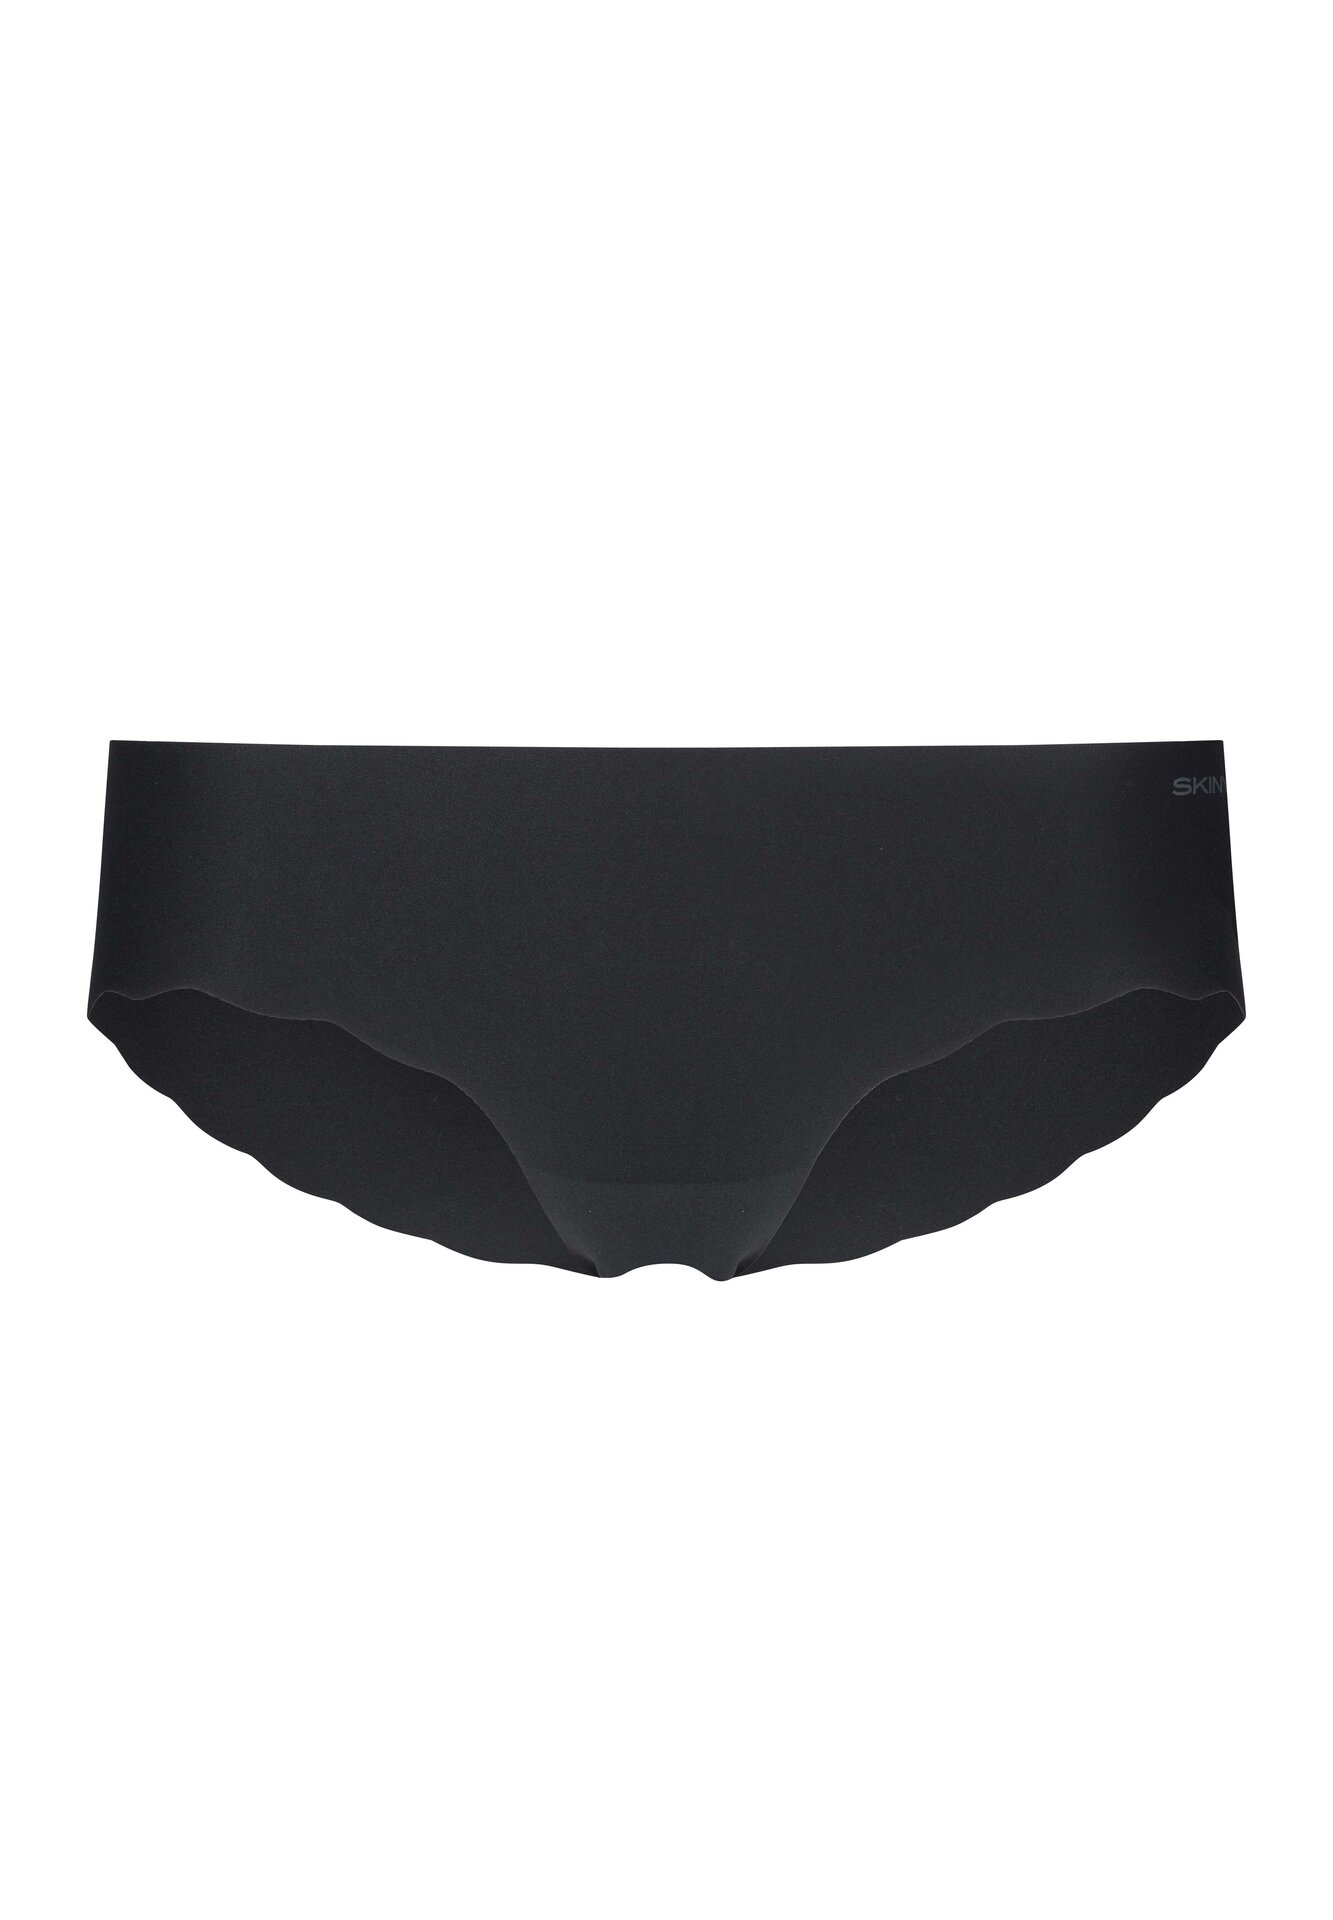 Skiny Daywear Every Day in Micro Essentials Damen Panty